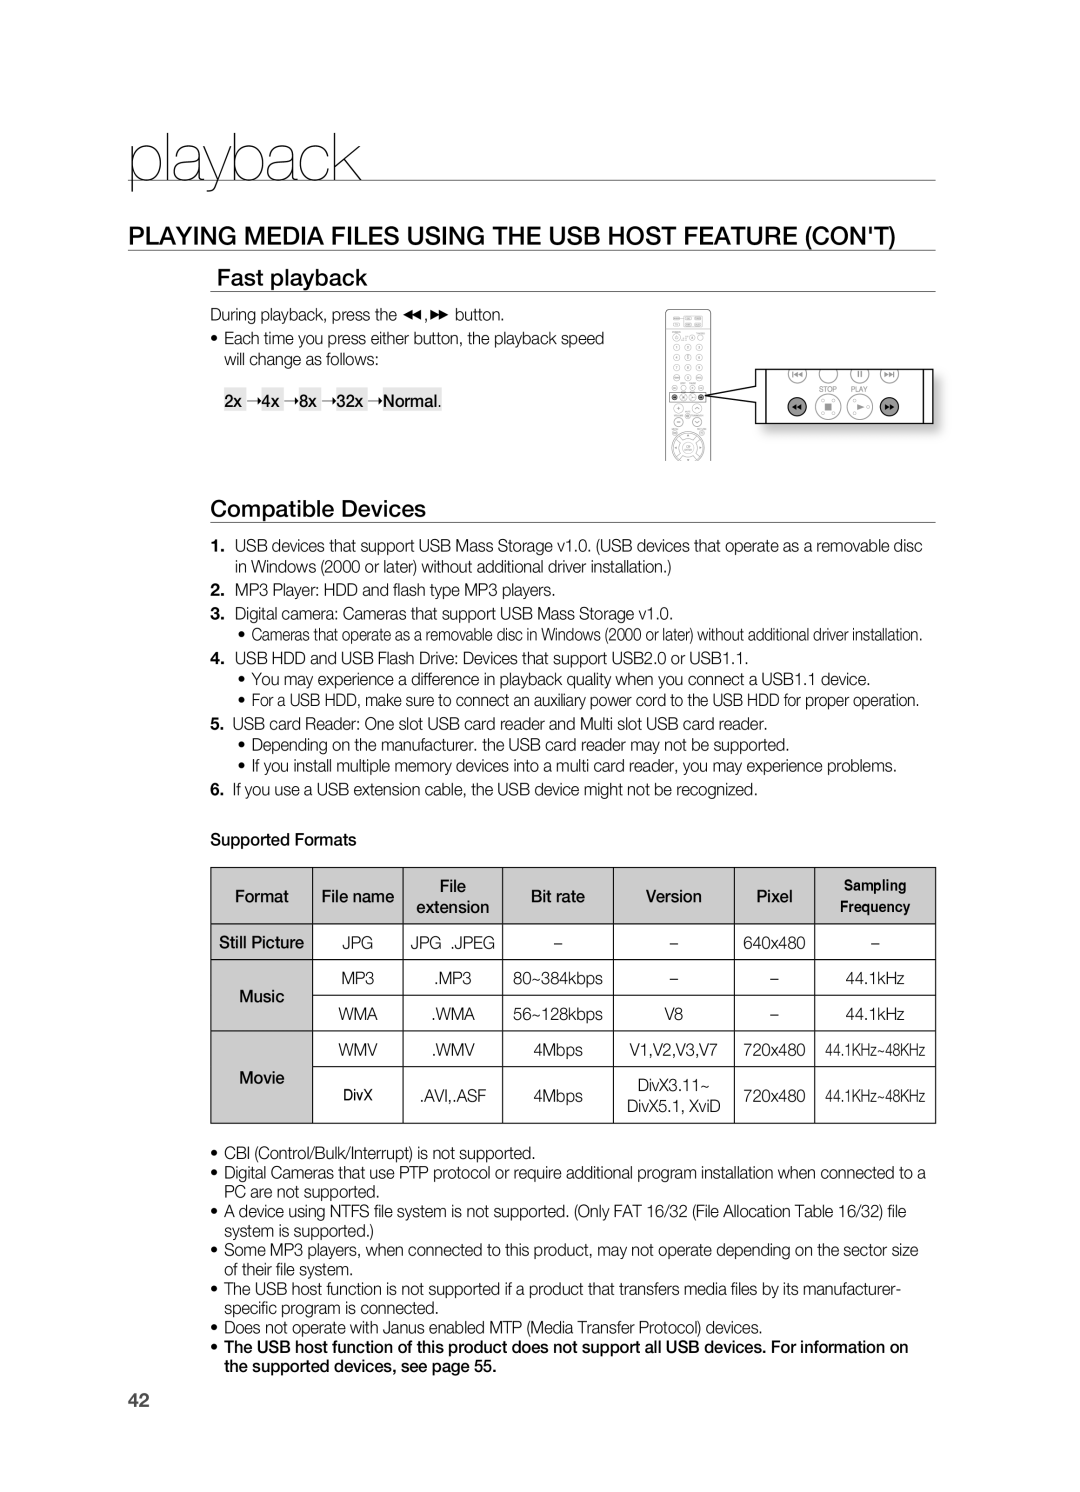 Samsung HT-X810 user manual Fast playback, Compatible Devices 